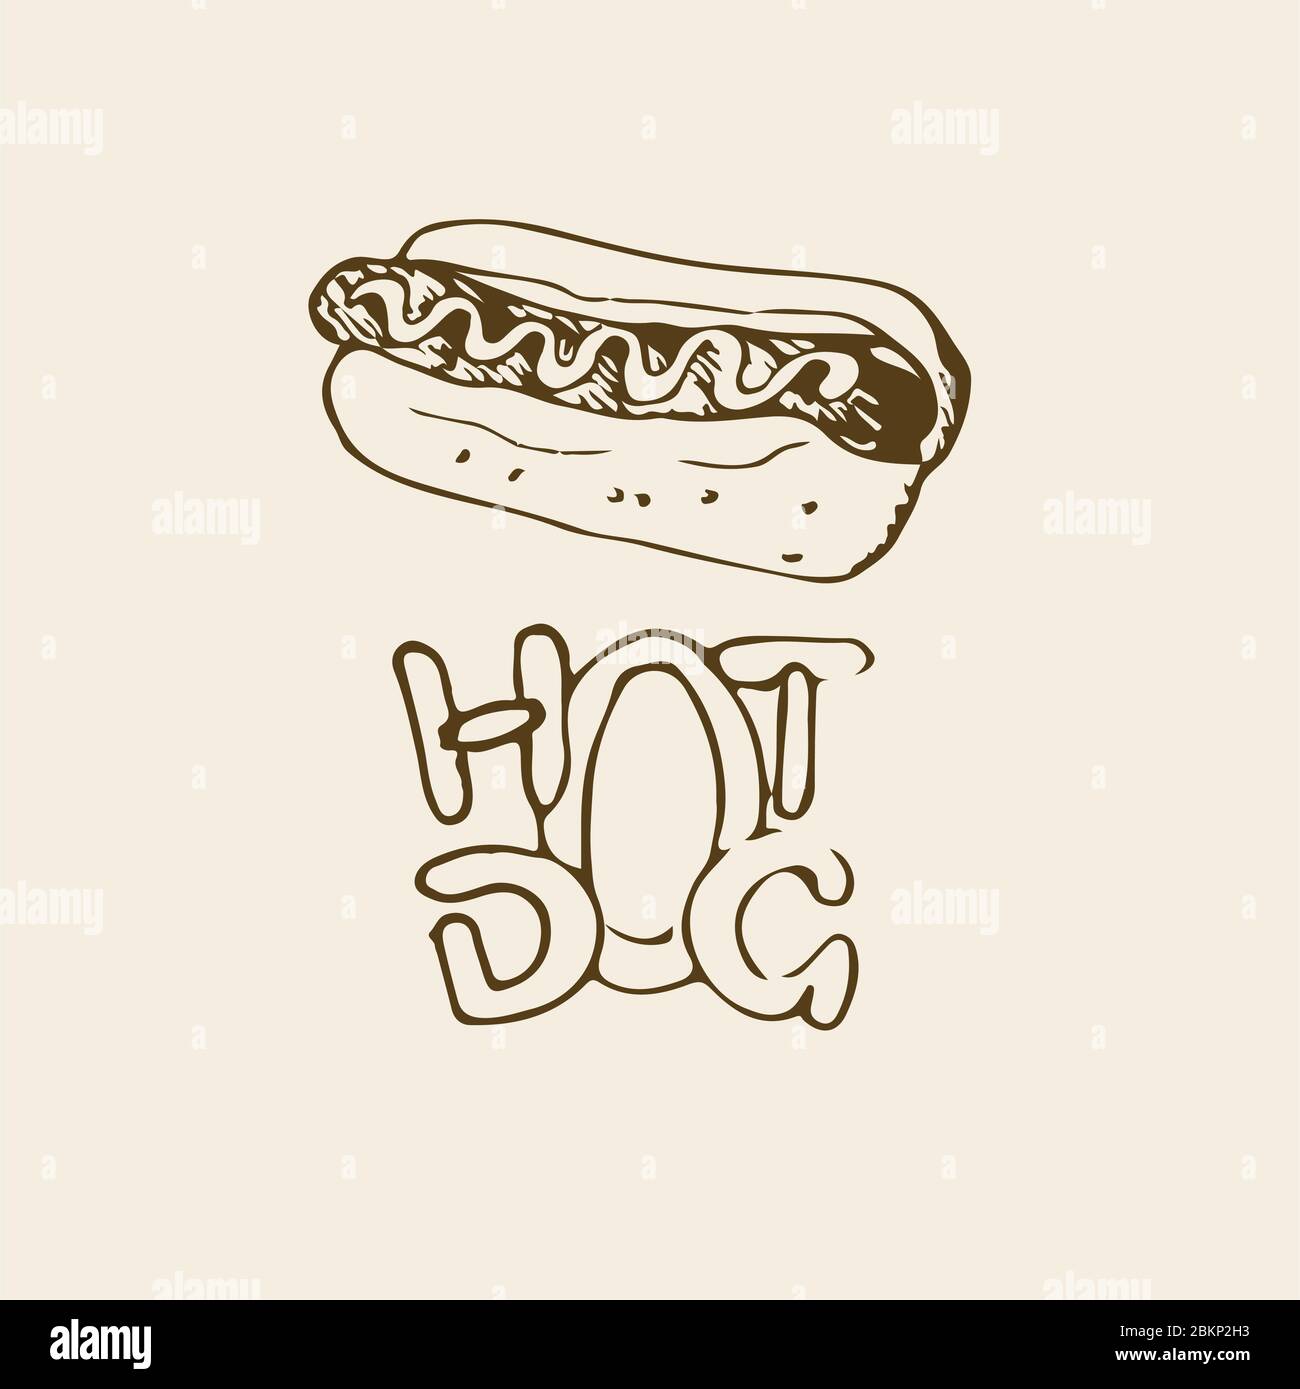 Hot Dog hand drawn illustration. Fast food design element, sketch of hotdog with sauce or mayonnaise and stylized hand written label of Hot Dog. Can b Stock Vector